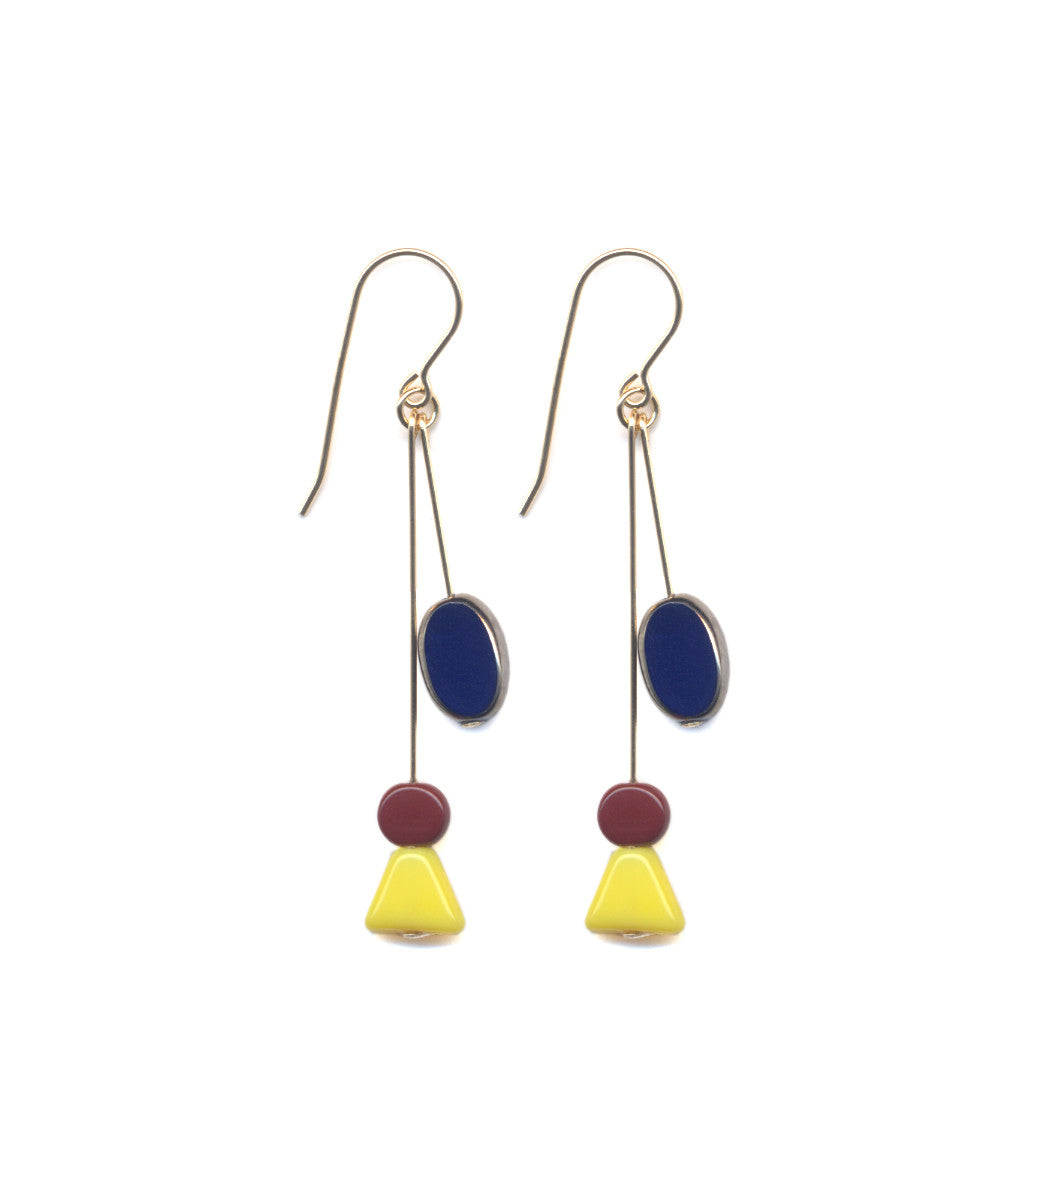 E1748 Yellow Triangle and Navy Oval Drop Earrings